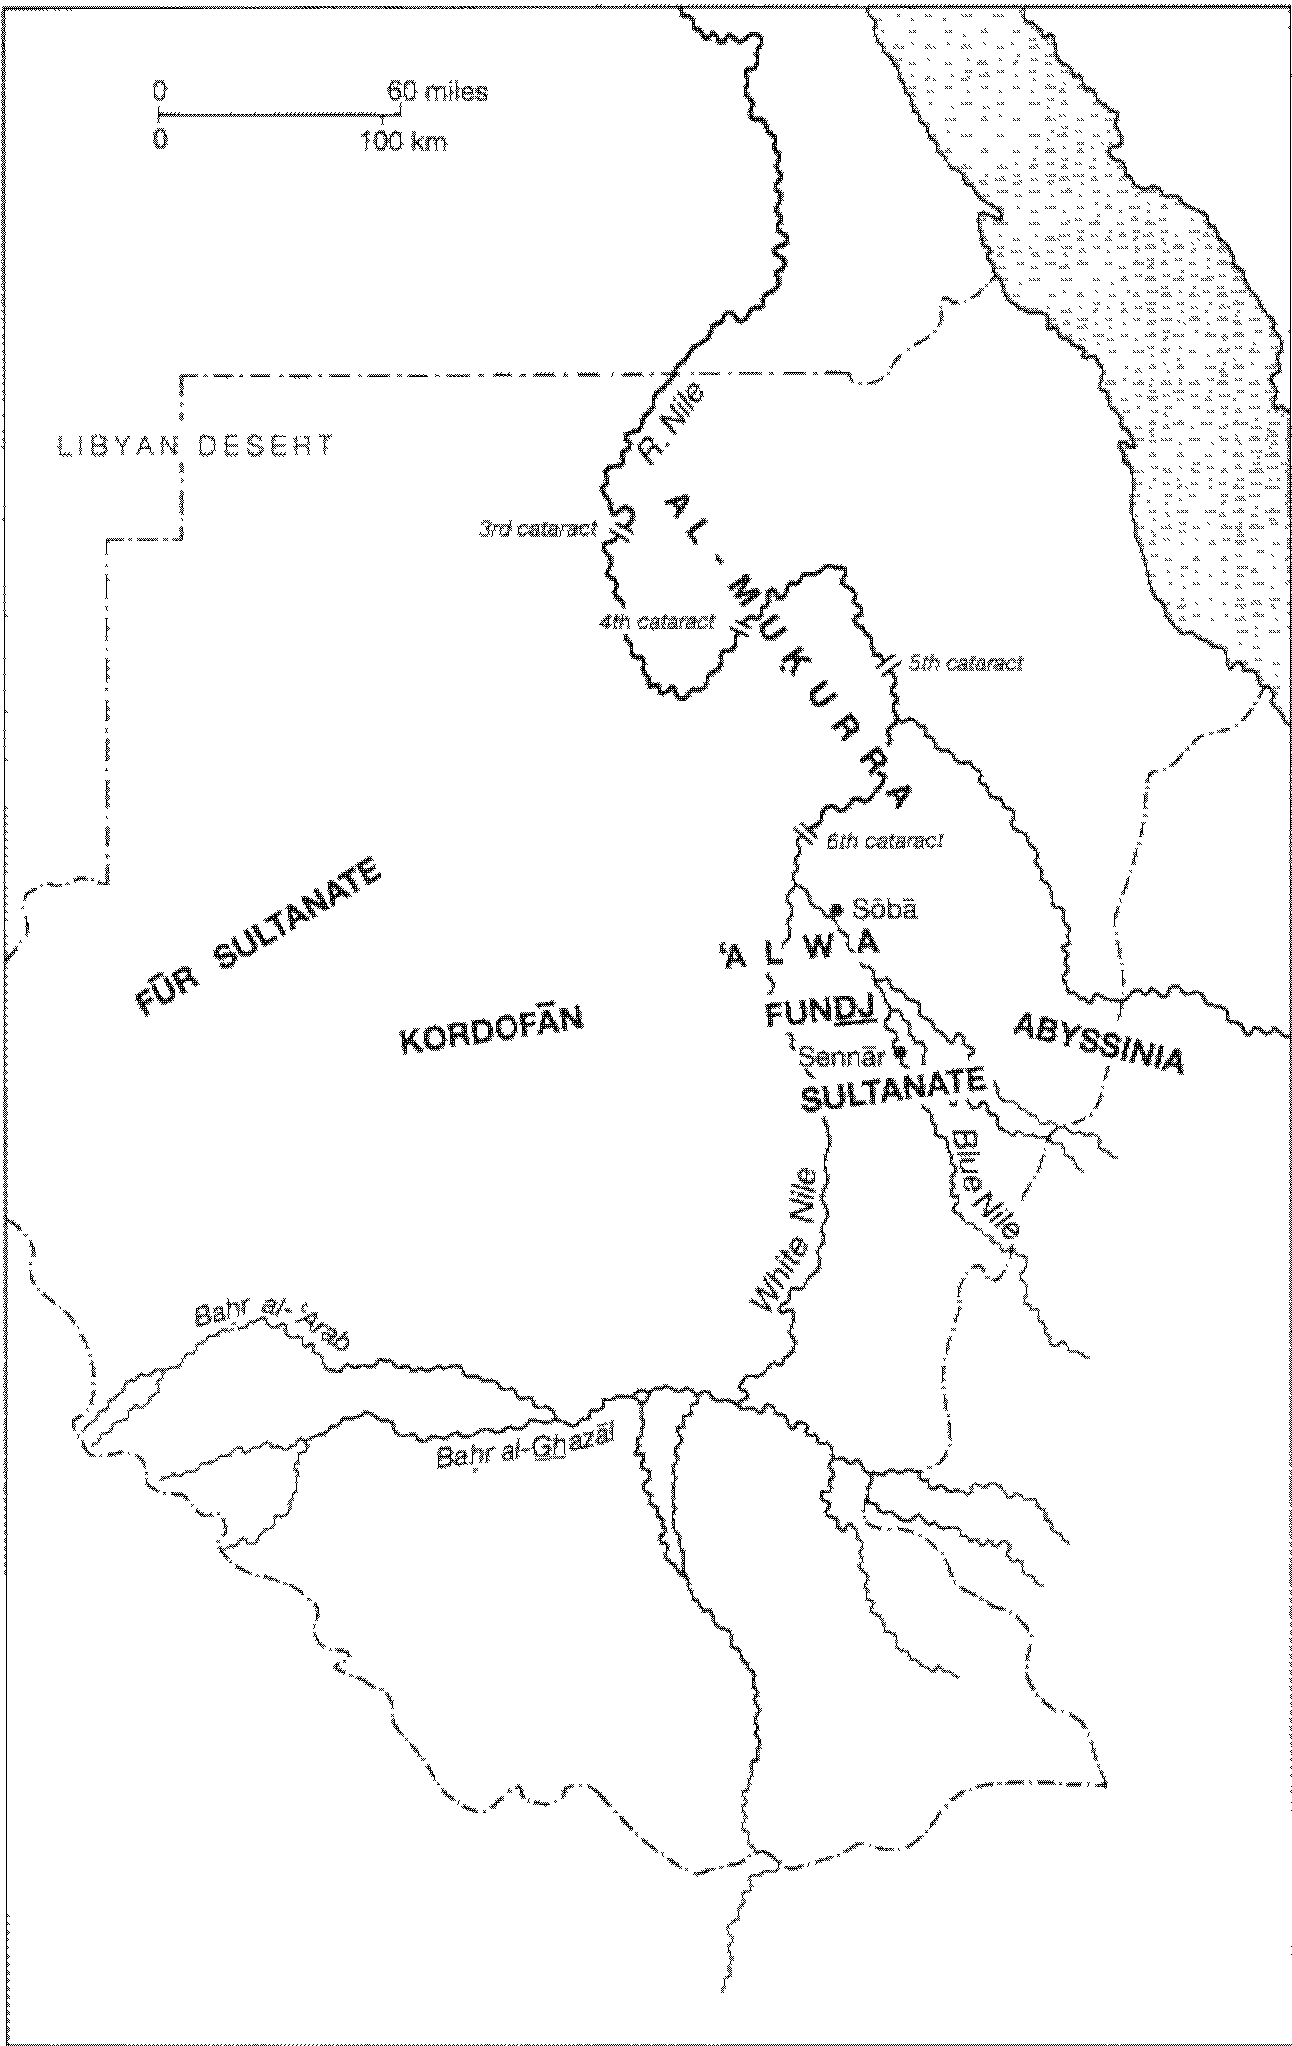 Kingdoms and sultanates of the Sudan (after Y. F. Hasan).png